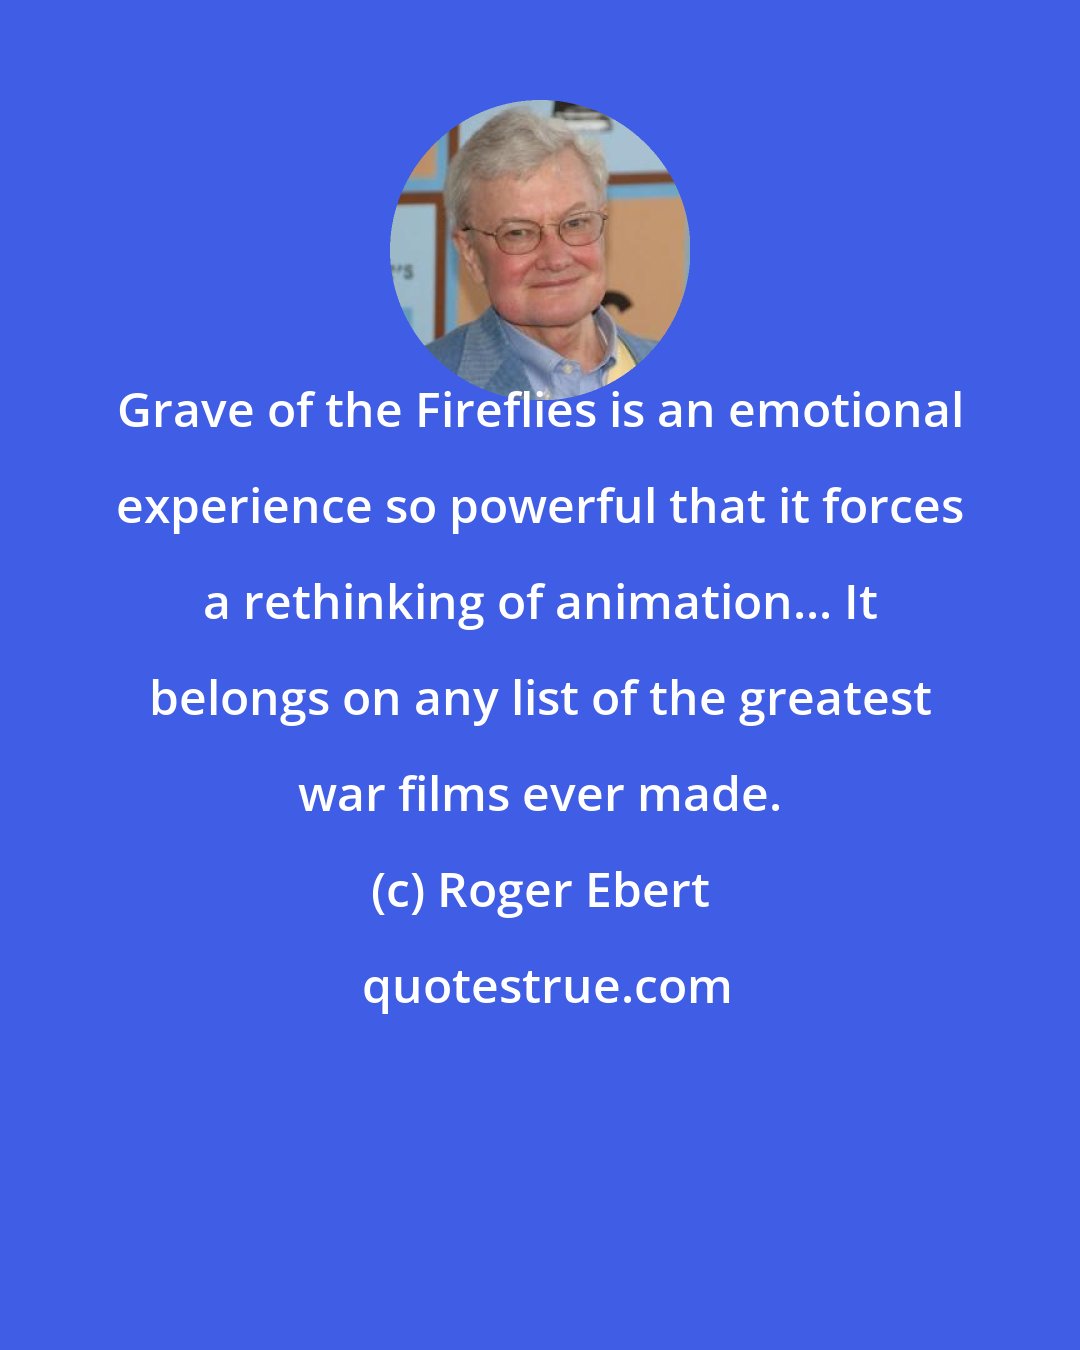 Roger Ebert: Grave of the Fireflies is an emotional experience so powerful that it forces a rethinking of animation... It belongs on any list of the greatest war films ever made.